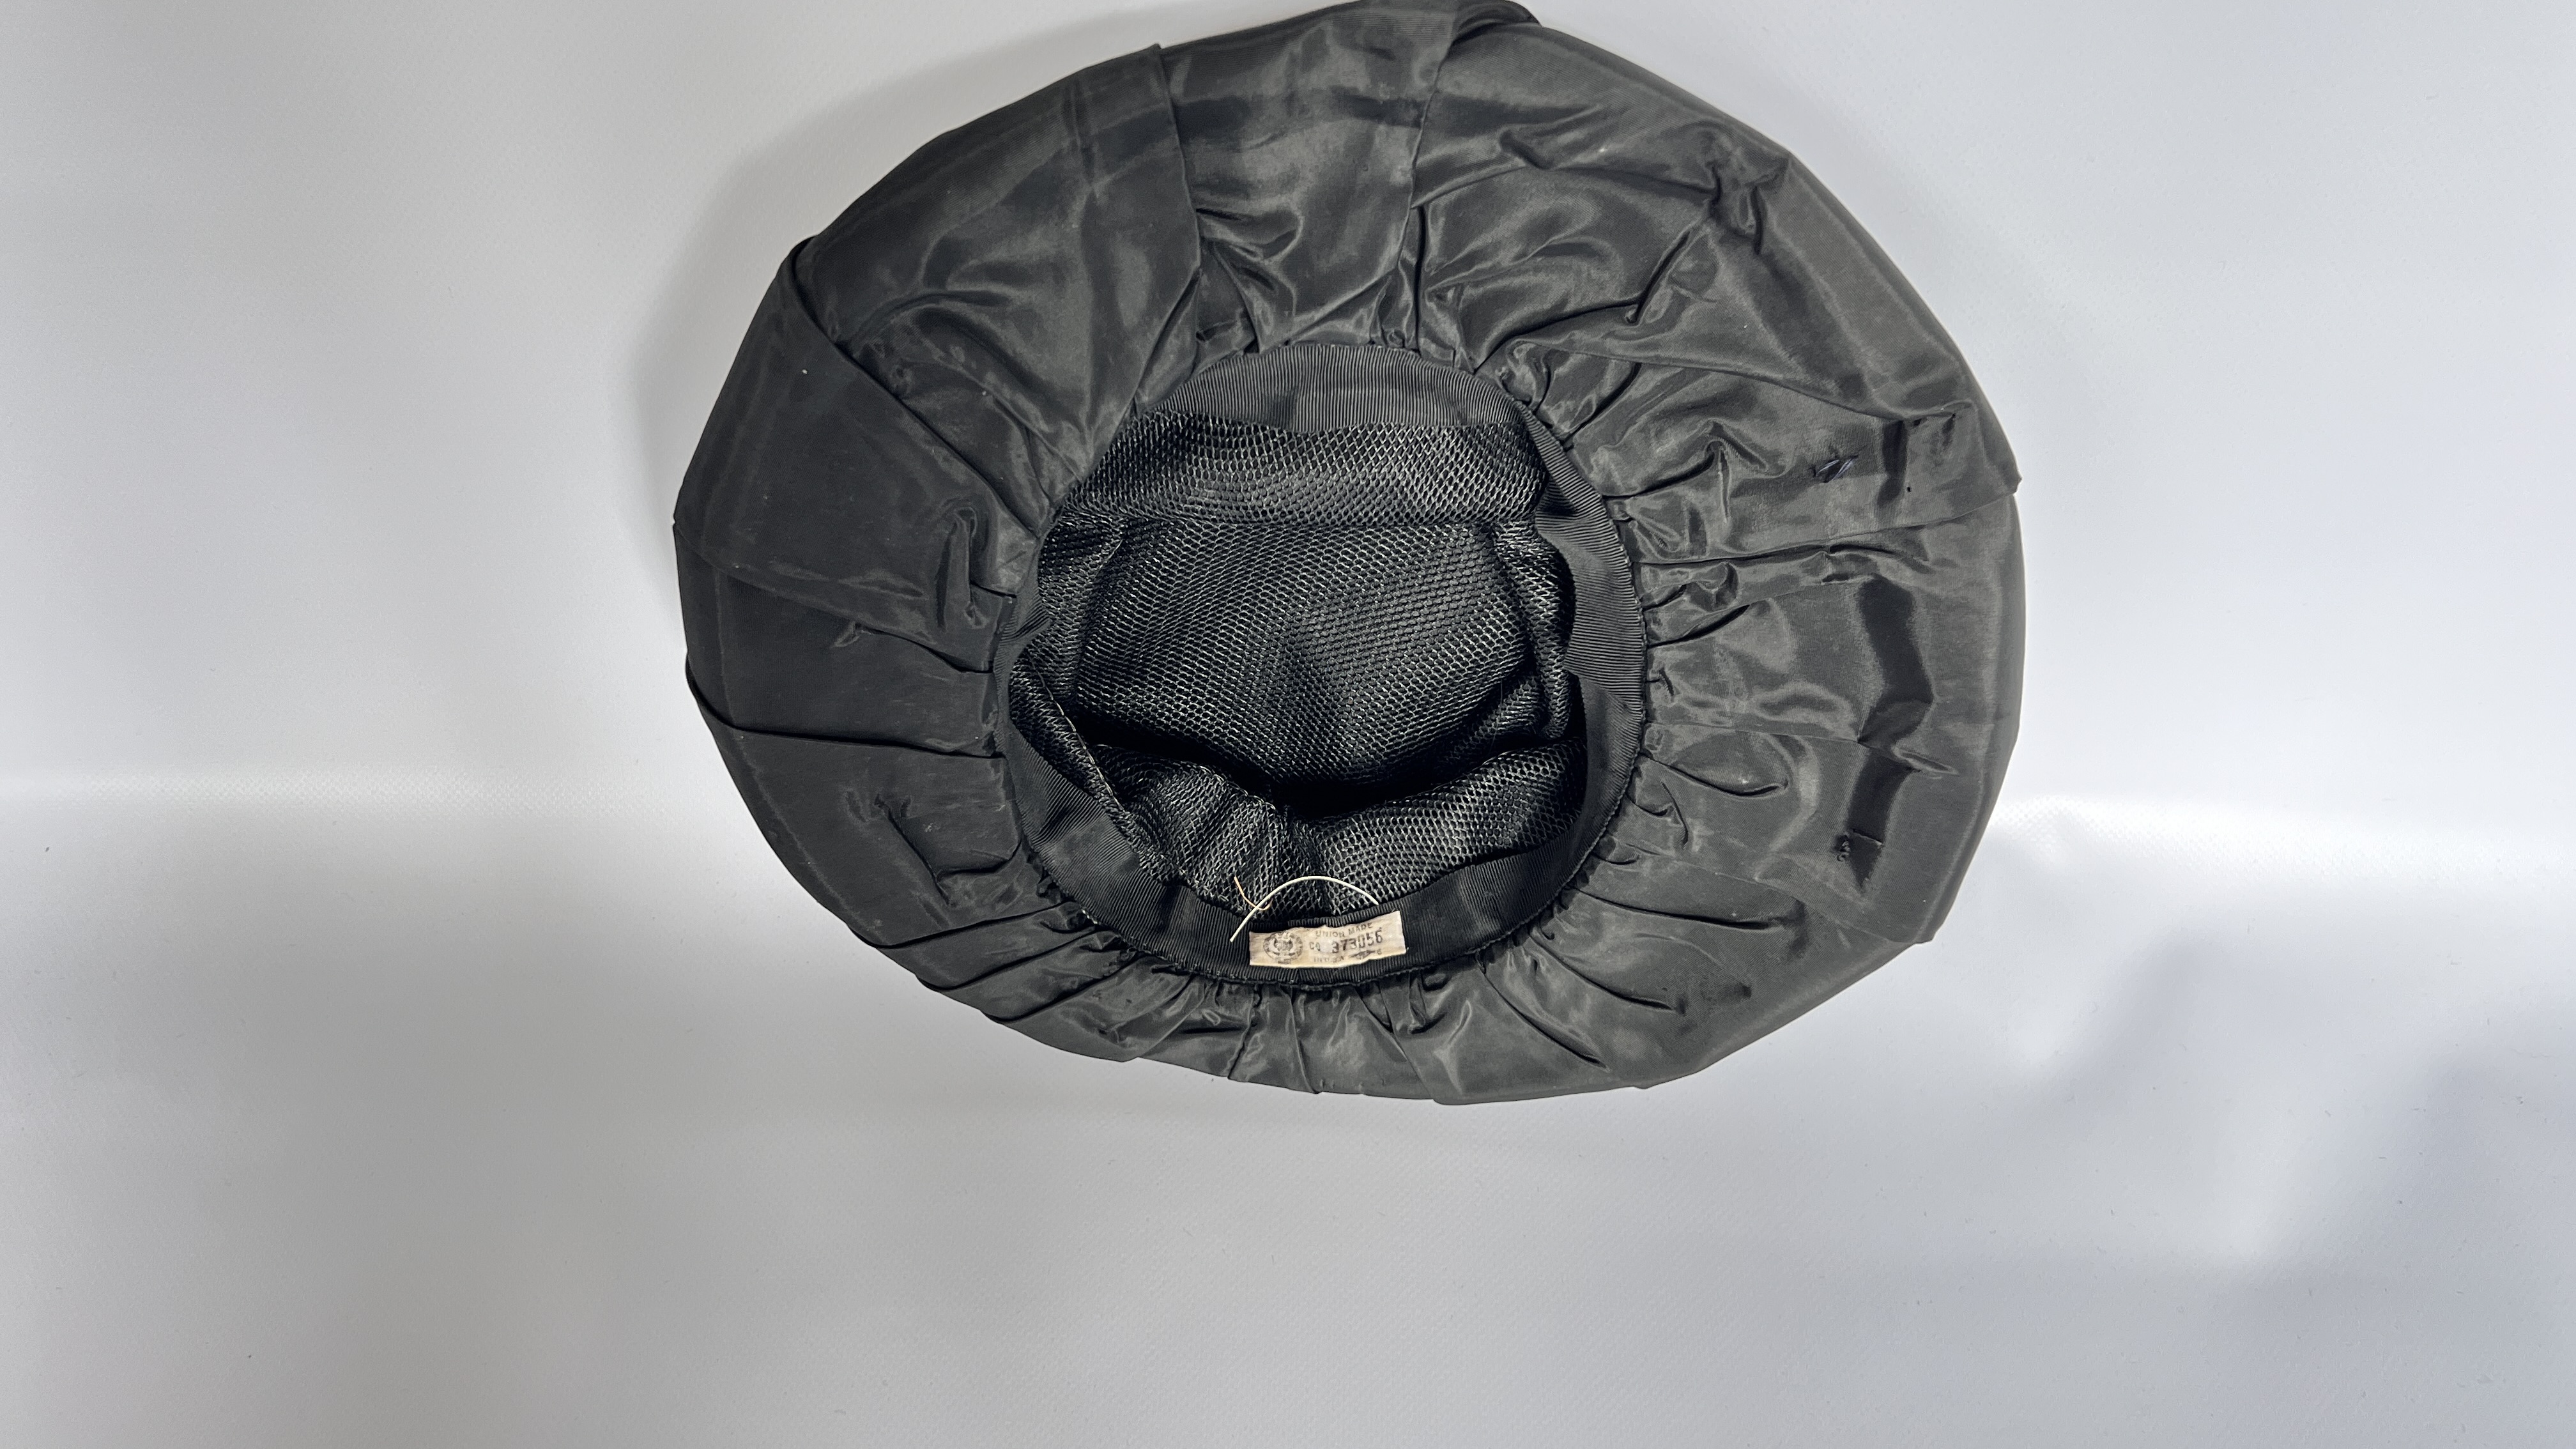 2 HAT BOXES CONTAINING 6 1940S HATS, 1 GREY FELT WITH VEIL (BADLY DAMAGED), - Image 27 of 28